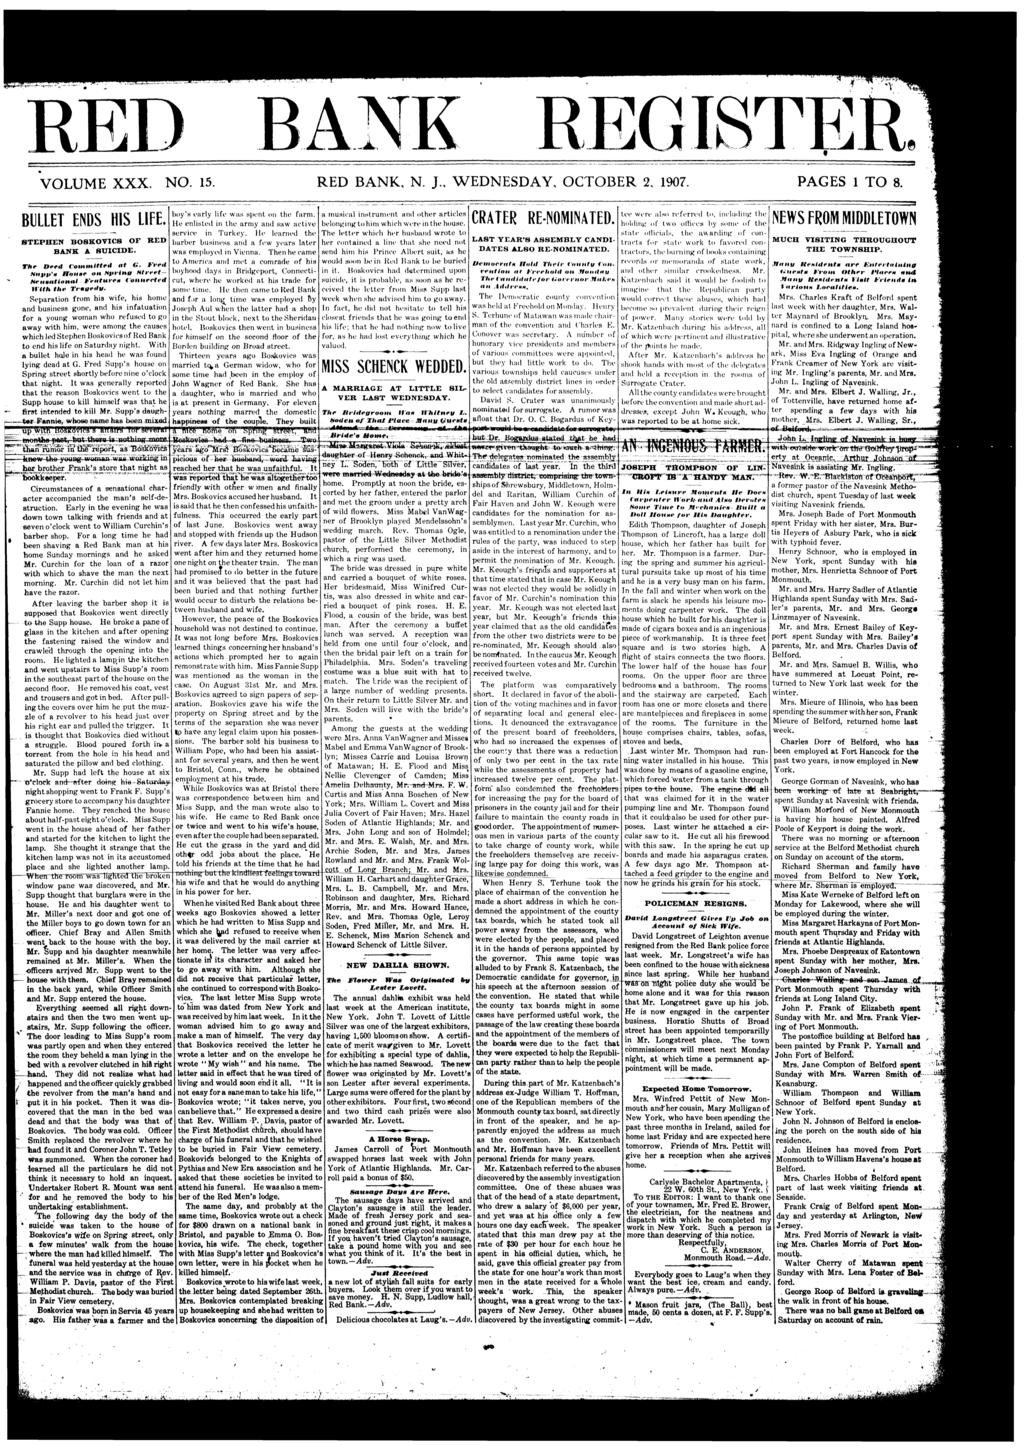 BANK REGSTER VOLUME XXX. NO. 15. RED BANK, N, J., WEDNESDAY, OCTOBER 2, 1907. PAGES 1 TO 8. BULLET ENDS HS LFE. STEPHEN BOBKOV1CB OF RED BANK A SUCDE, The Deed Commtted at G.